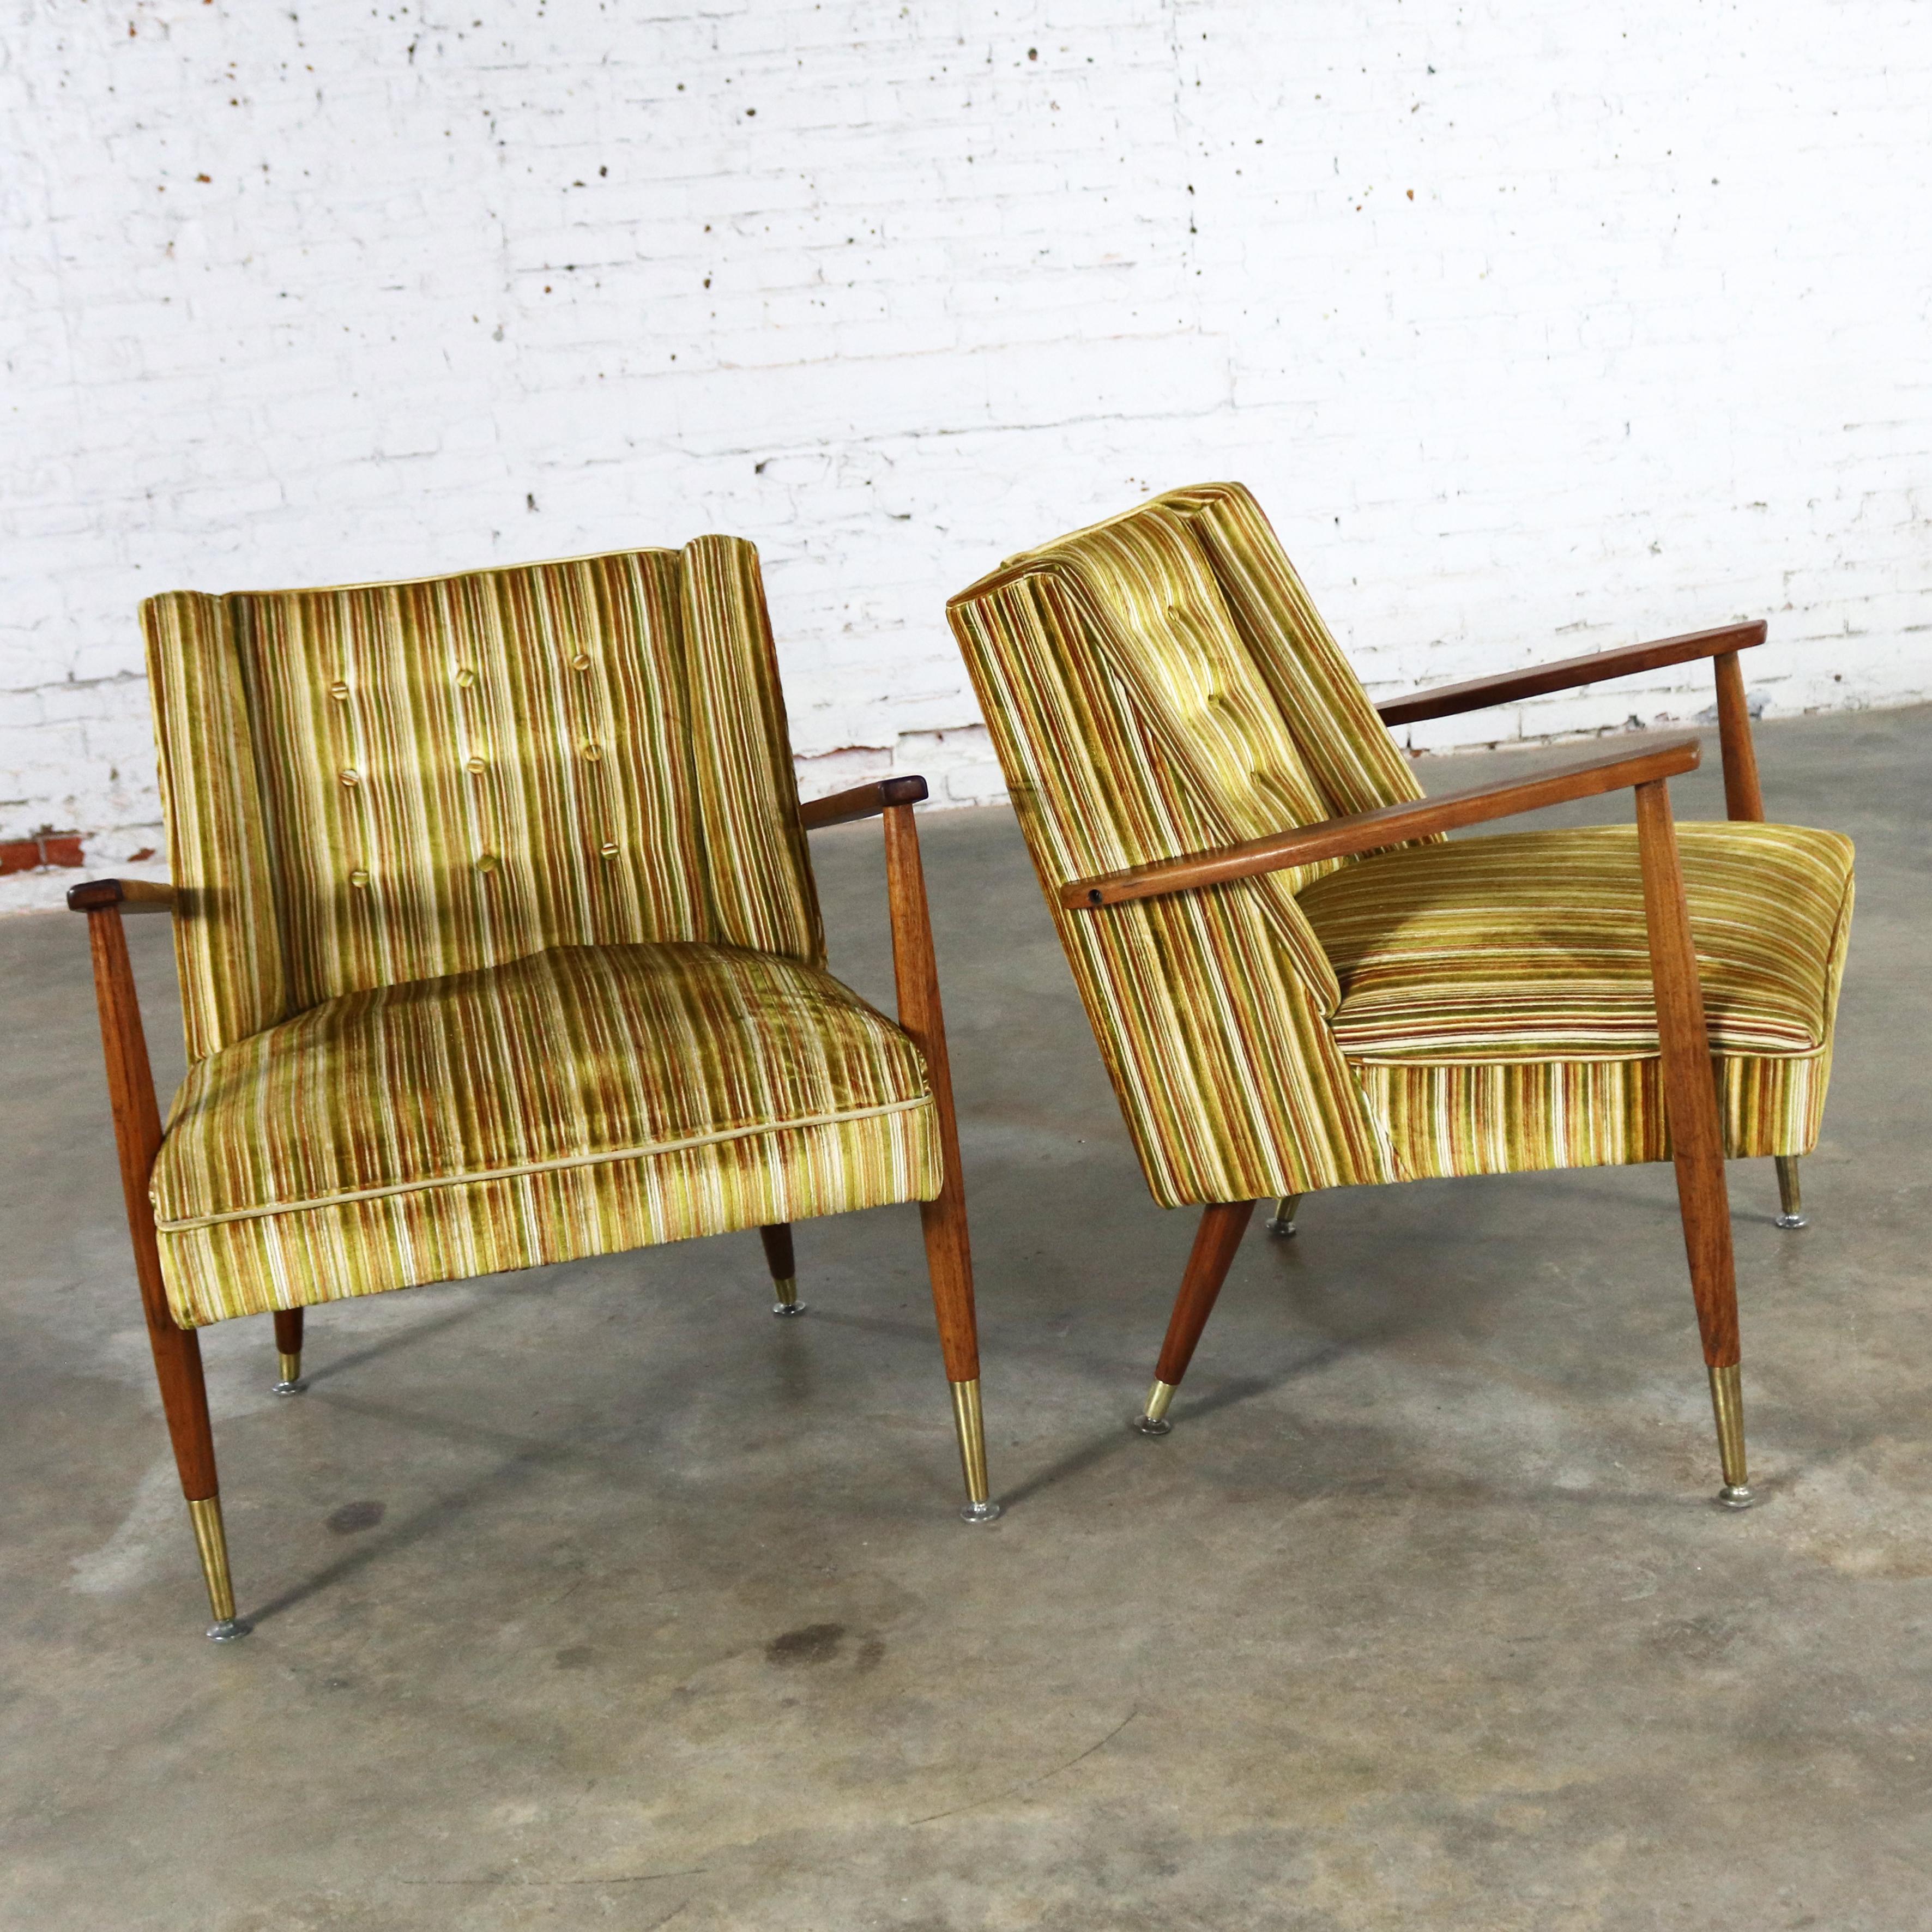 20th Century Mid-Century Modern Pair of Lounge Chairs with Teak Arms and Legs & Brass Sabots